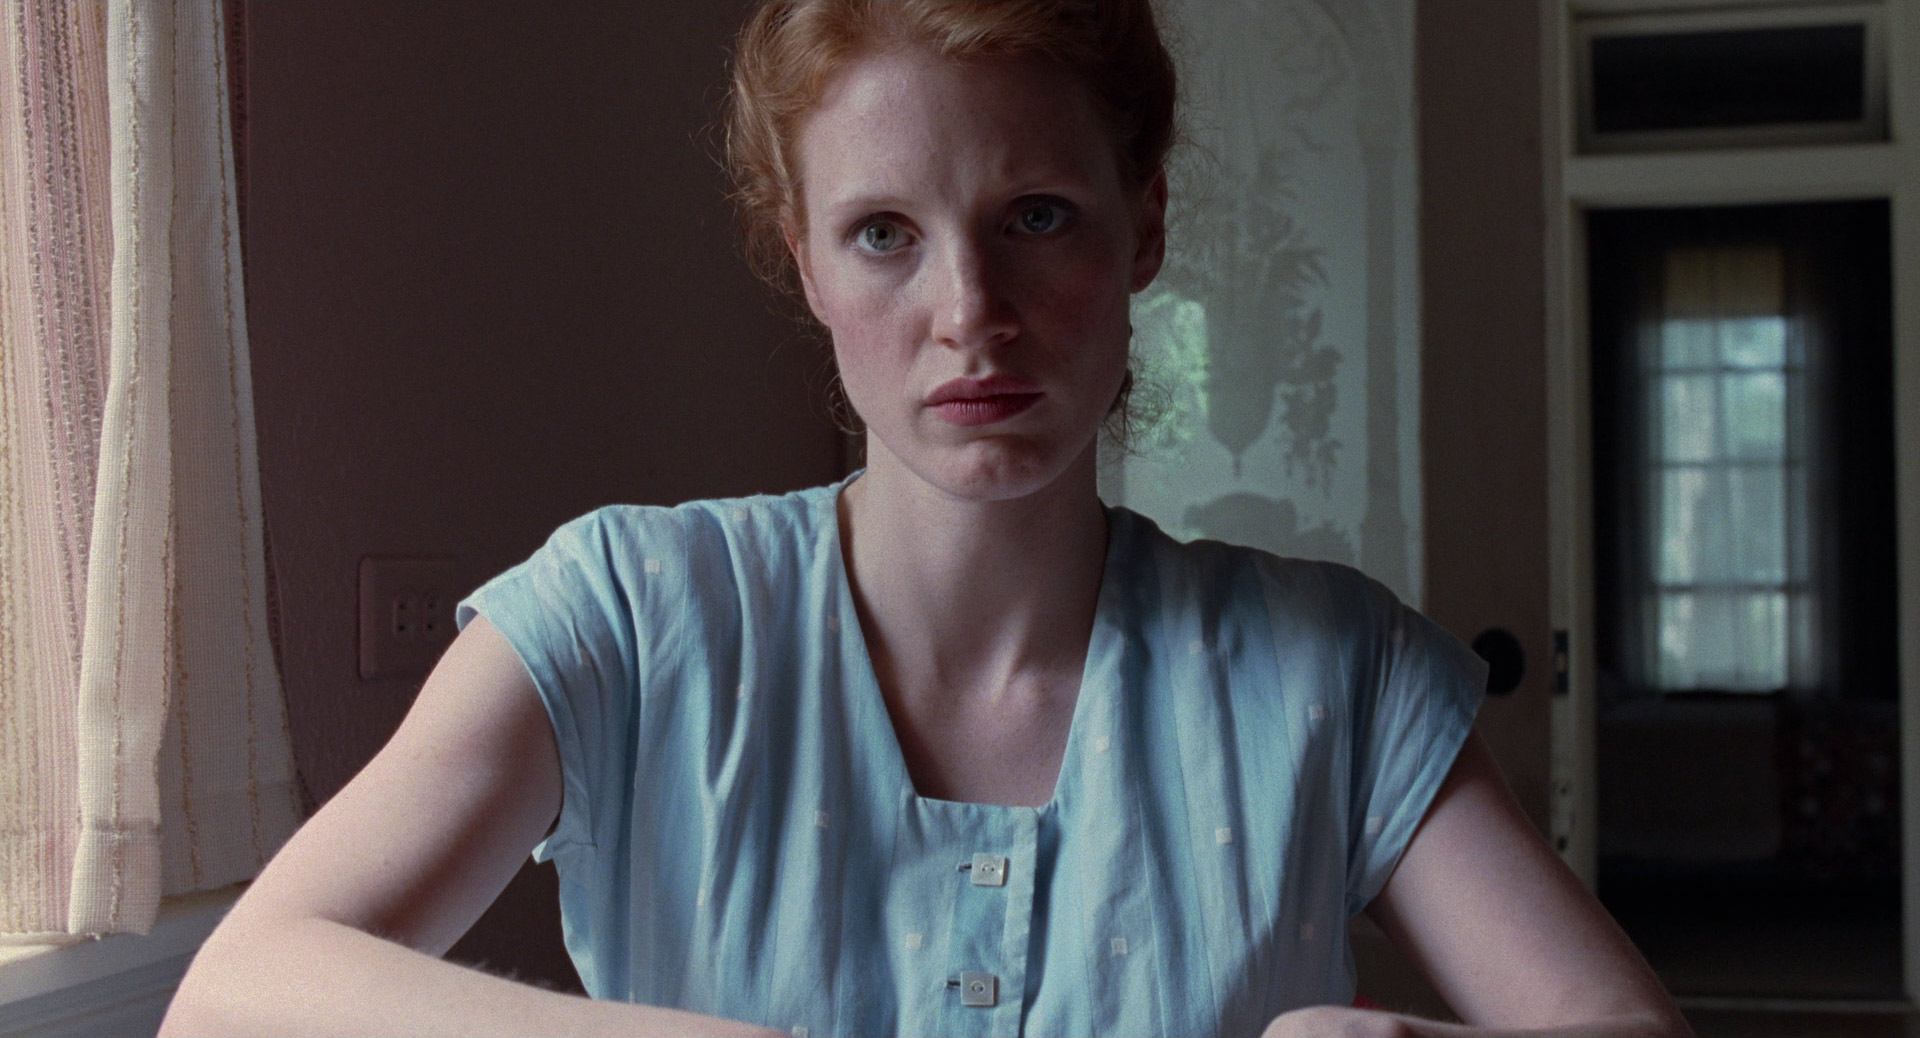 Jessica Chastain in The Tree of Life